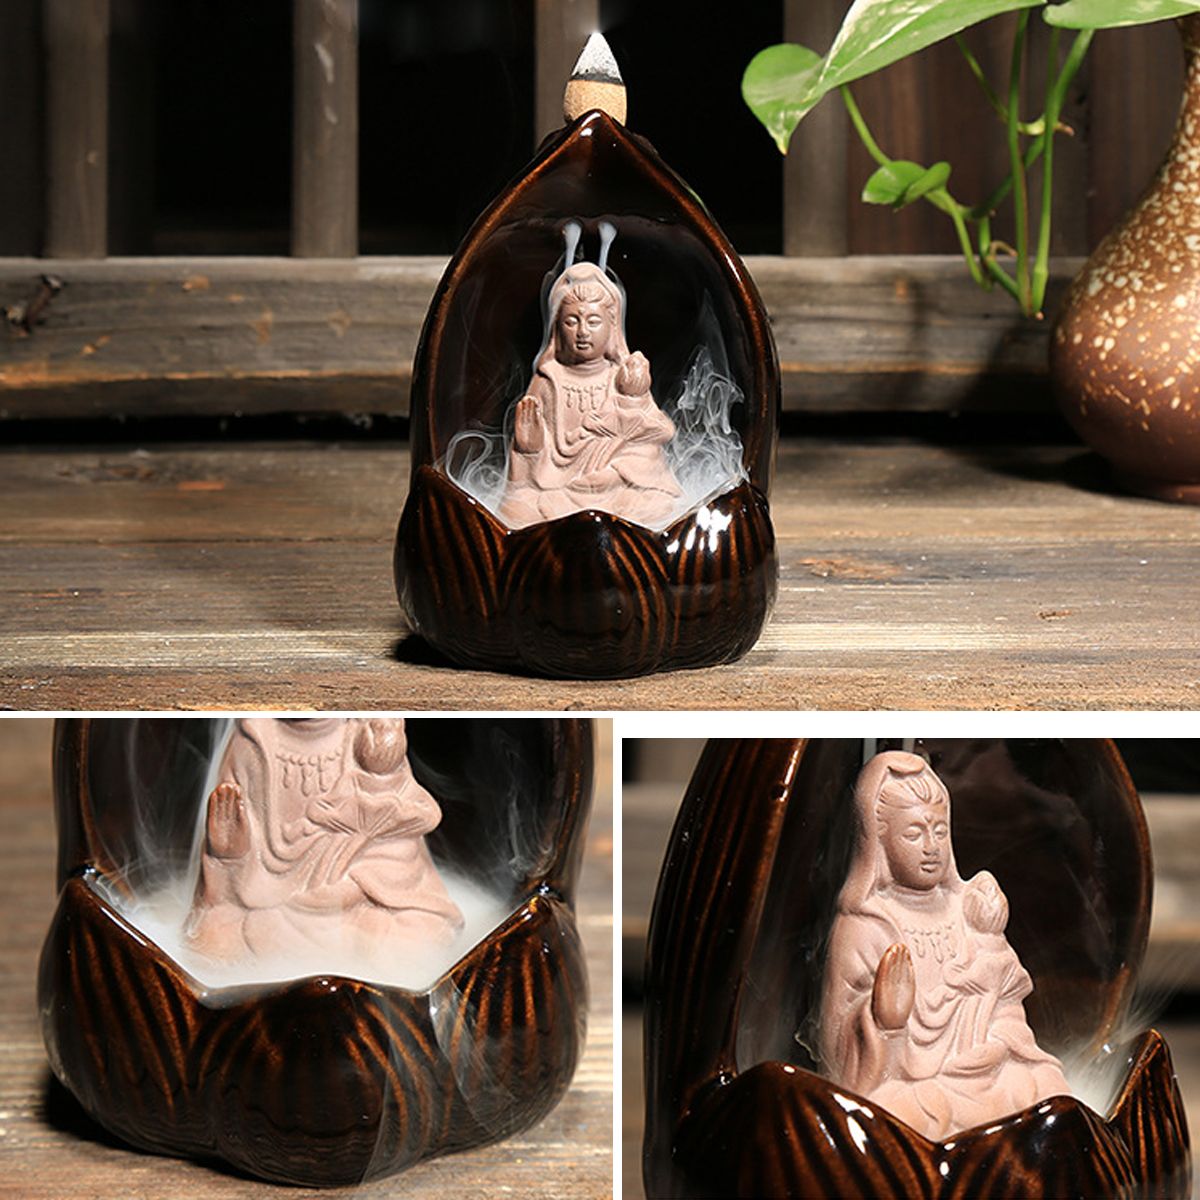 Ceramic-Backflow-Incense-Burner-with-Light-Sandalwood-Cone-Yoga-Aromatherapy-Gifts-Home-Decor-1446223